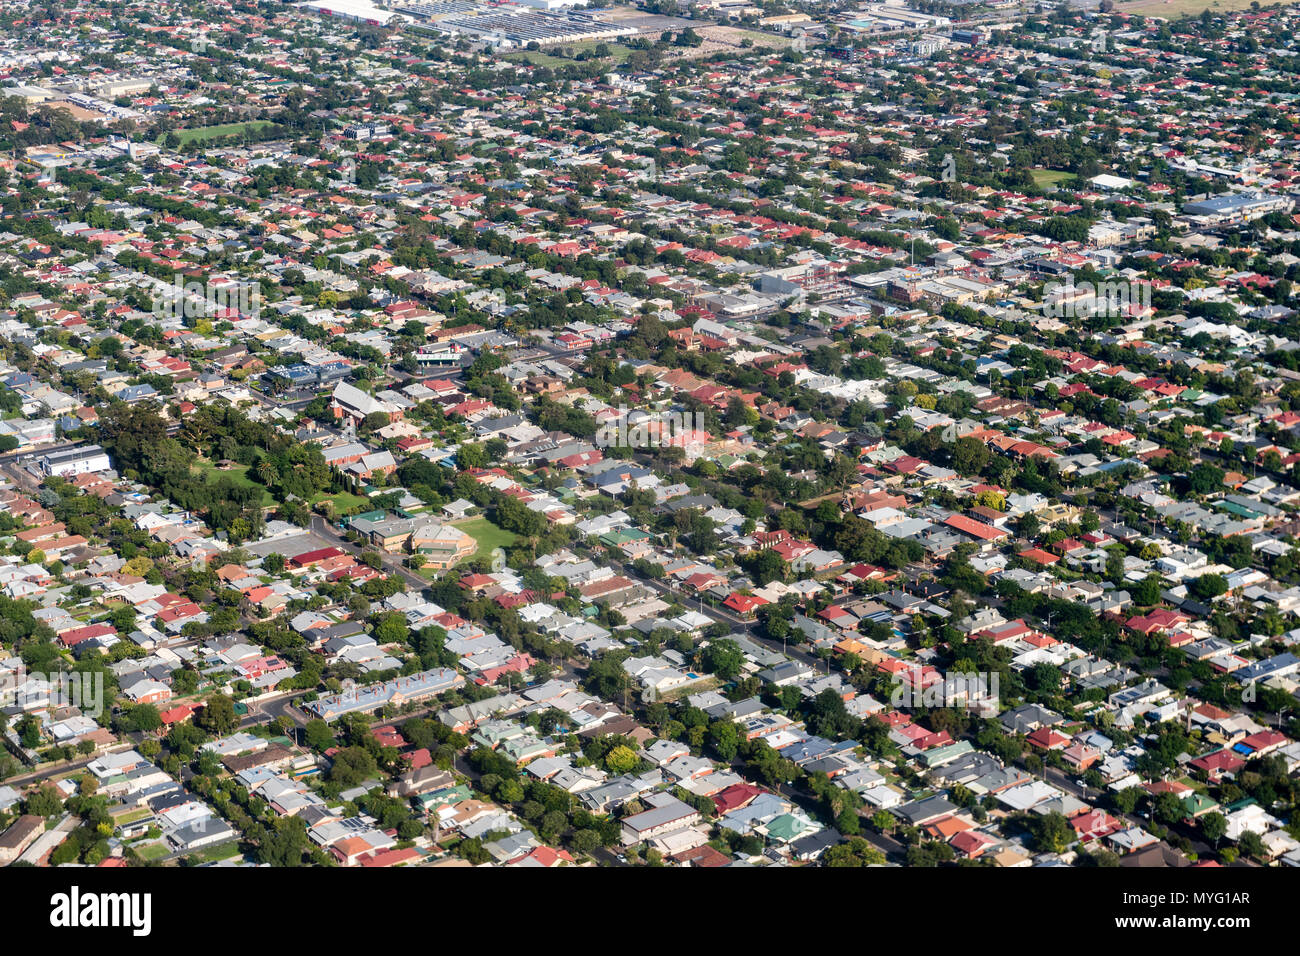 Sprawling suburbs on the outskirts of Adelaide. Stock Photo